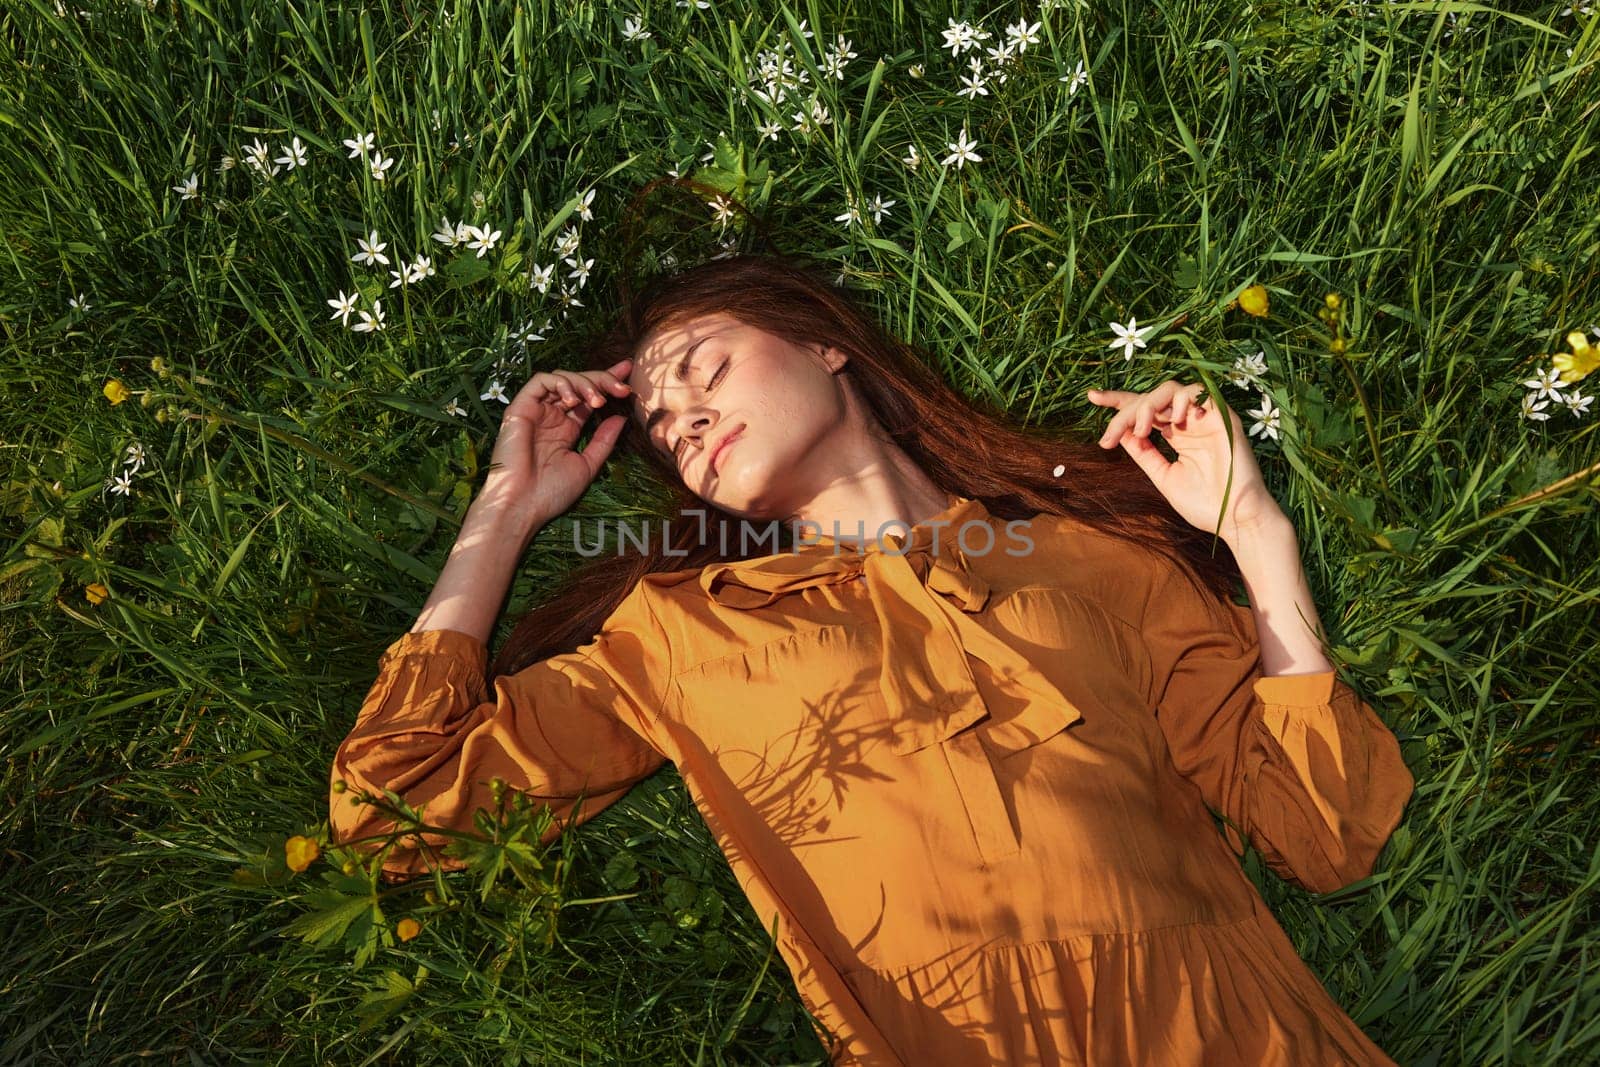 a relaxed woman, resting lying in the green grass, in a long orange dress, with her eyes closed and a pleasant smile on her face, recuperating. High quality photo